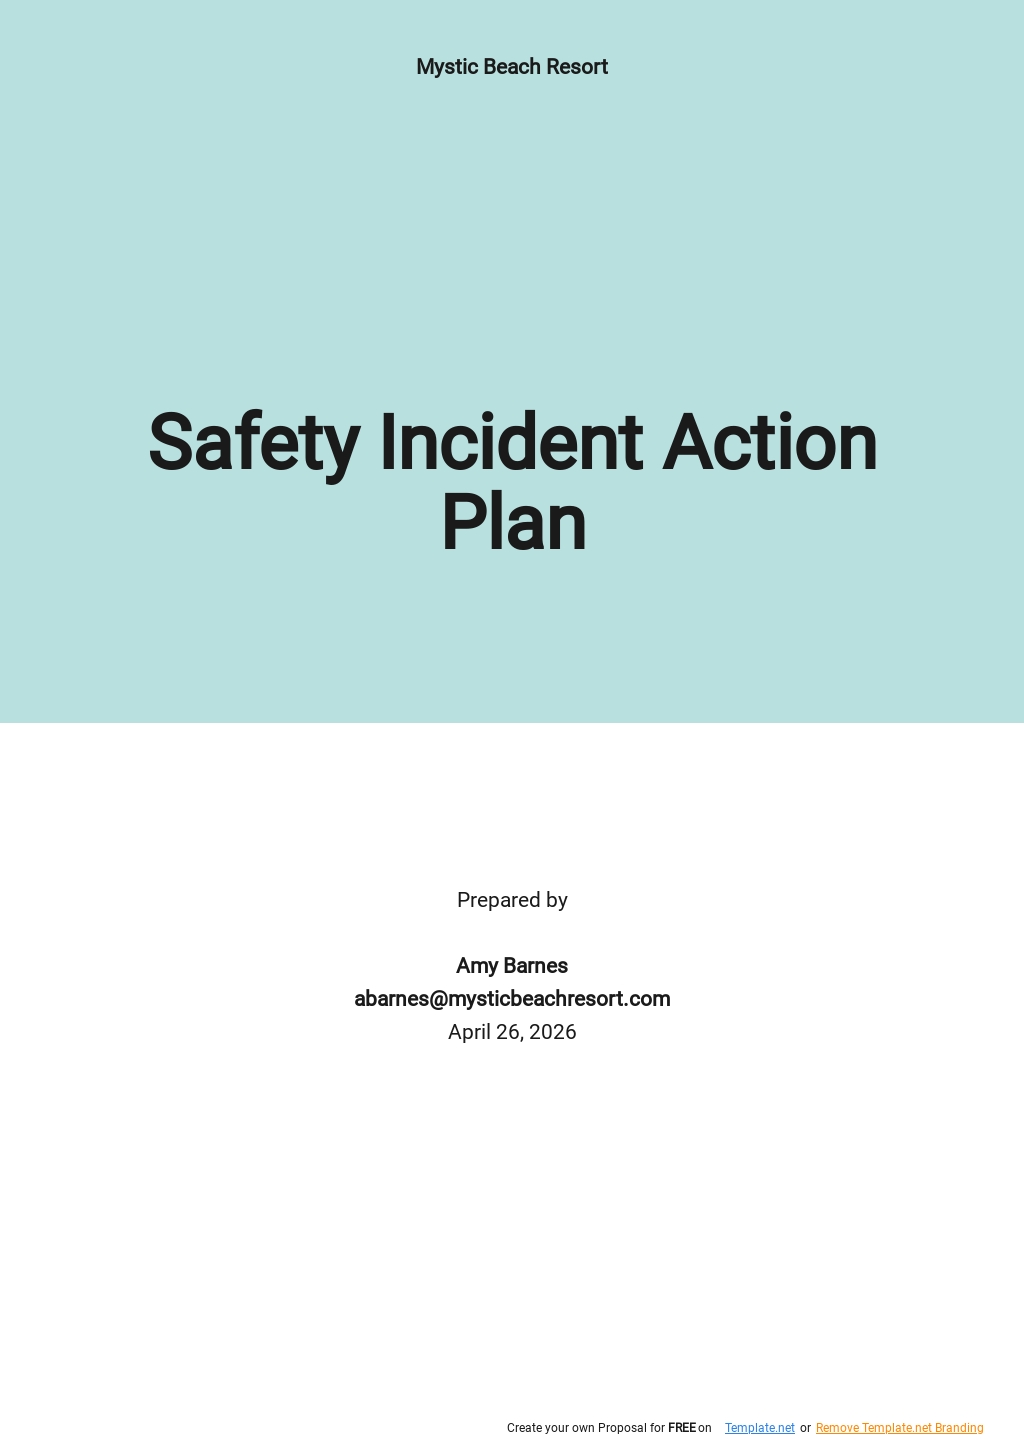 Health and Safety Action Plan Template - Google Docs, Word, Apple Pages ...